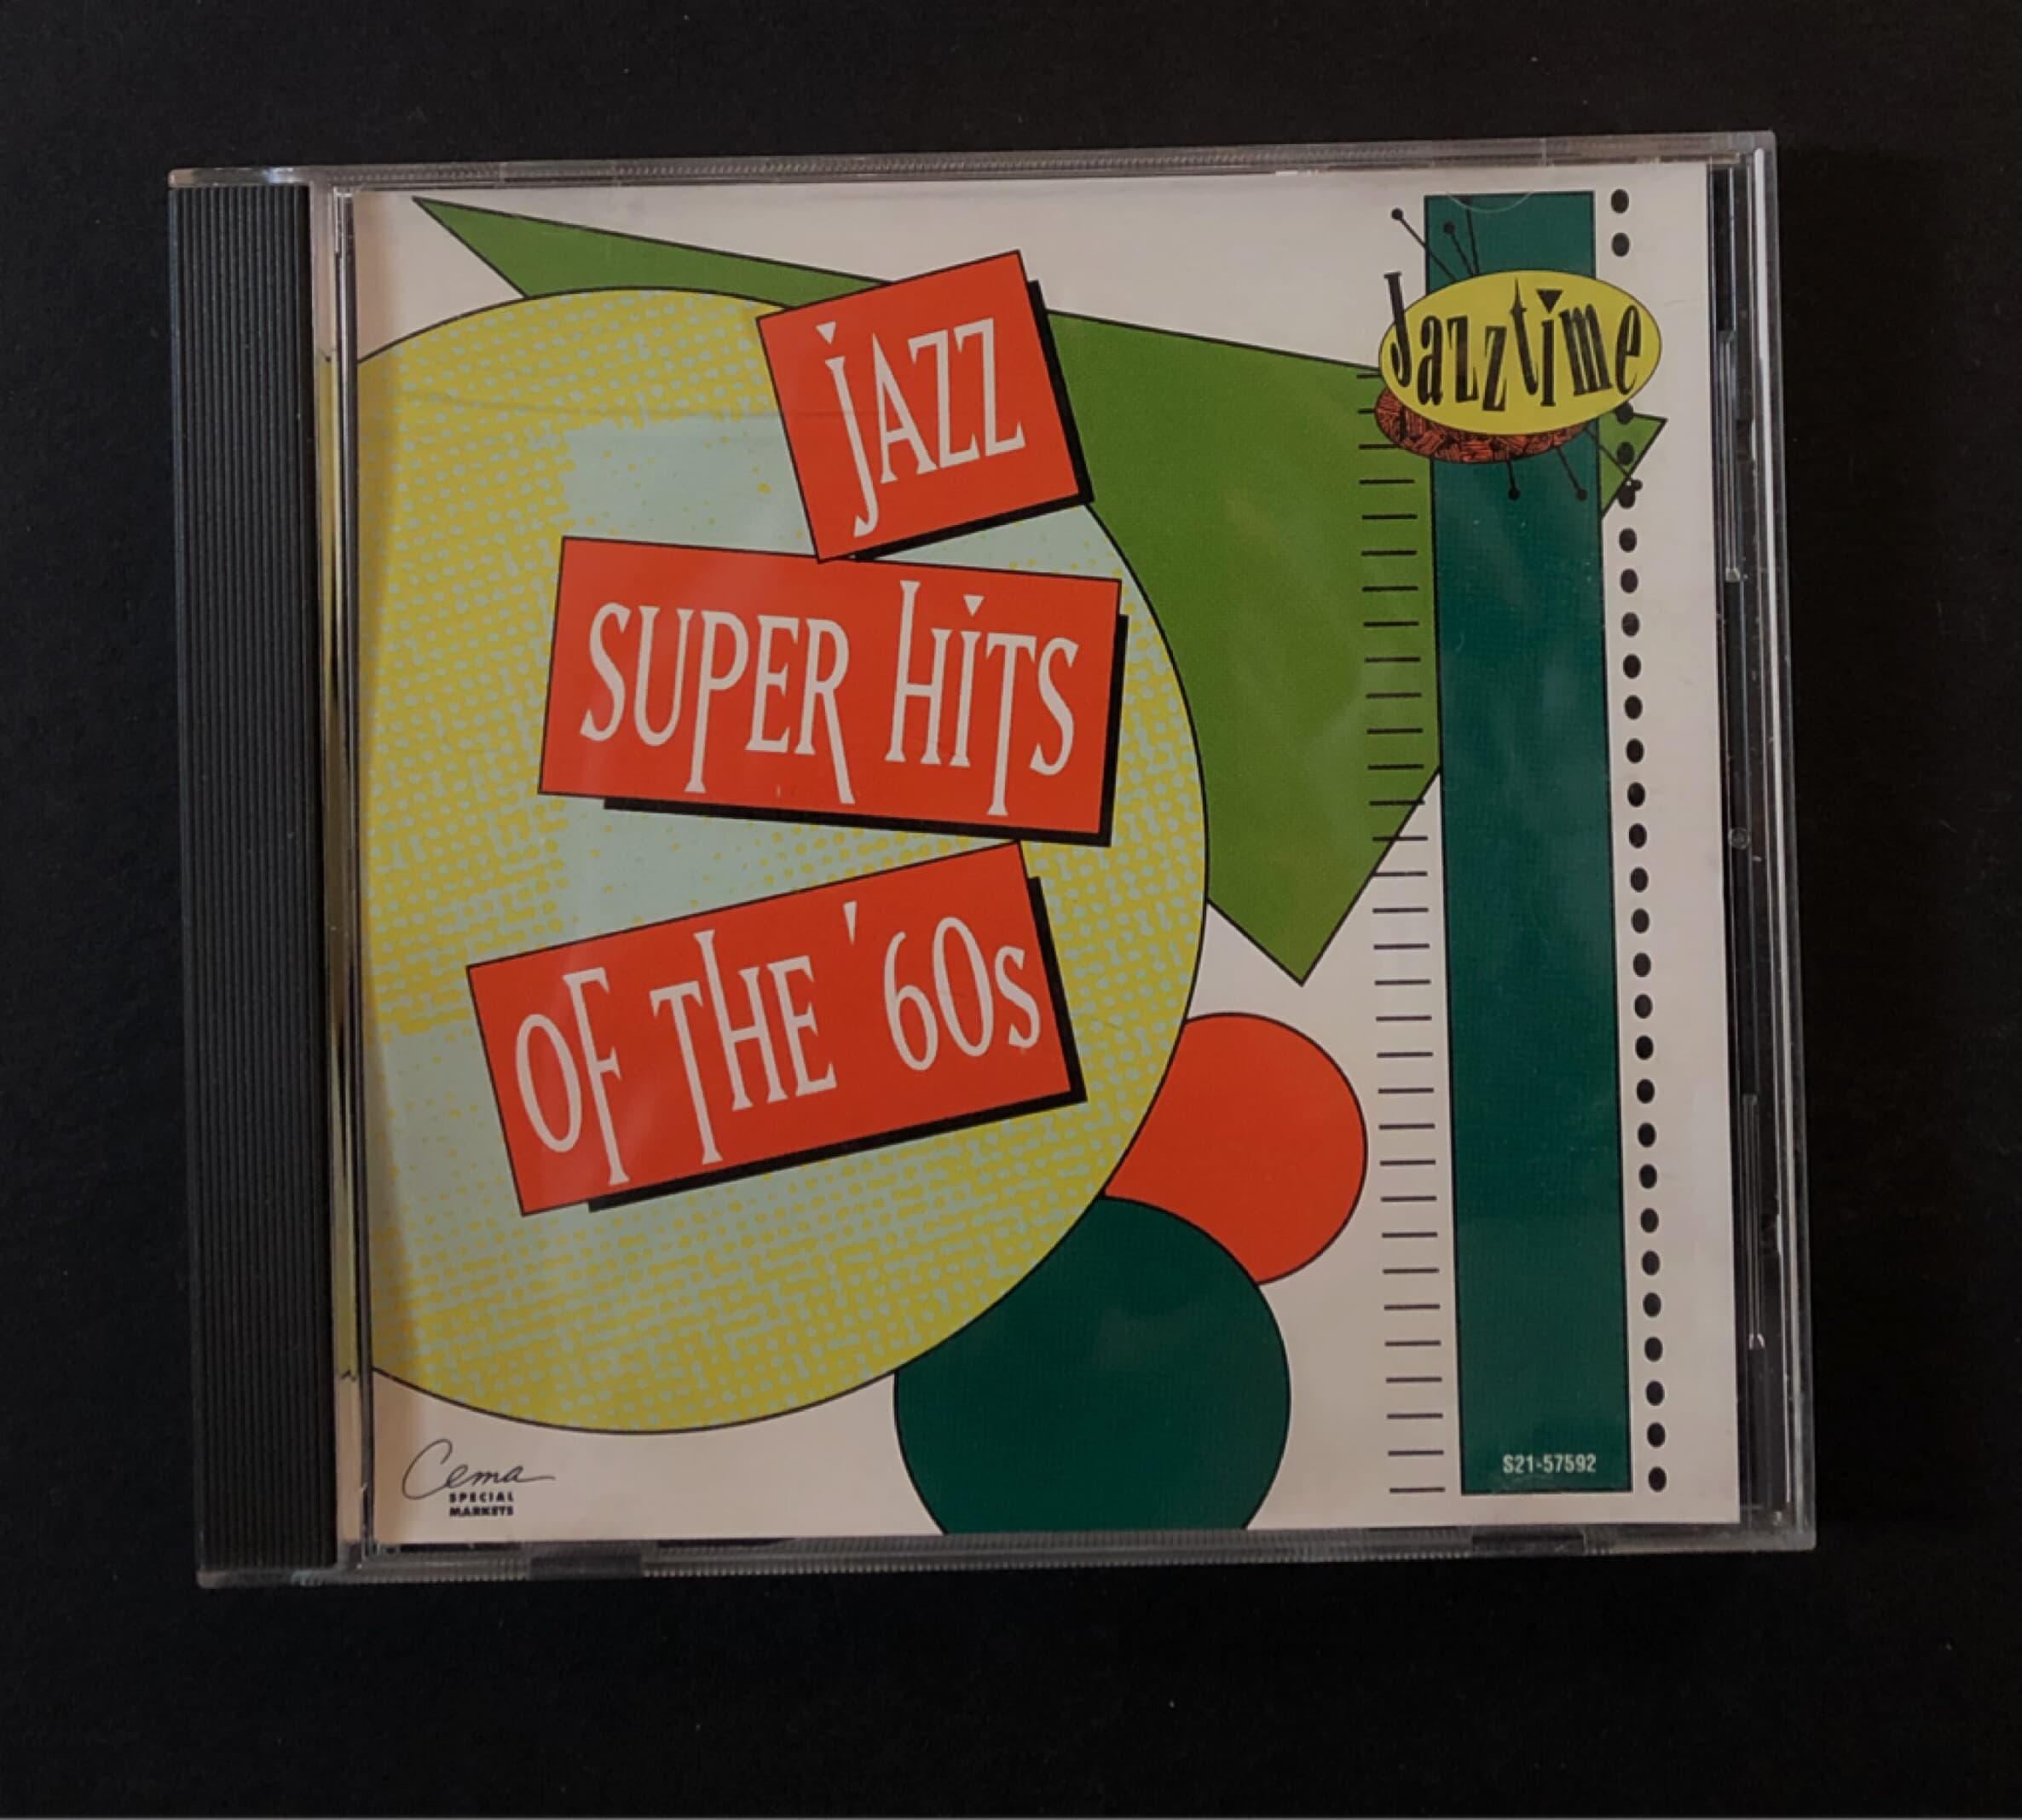 [CD] JAZZ SUPER HITS OF THE '60S  (US 발매)